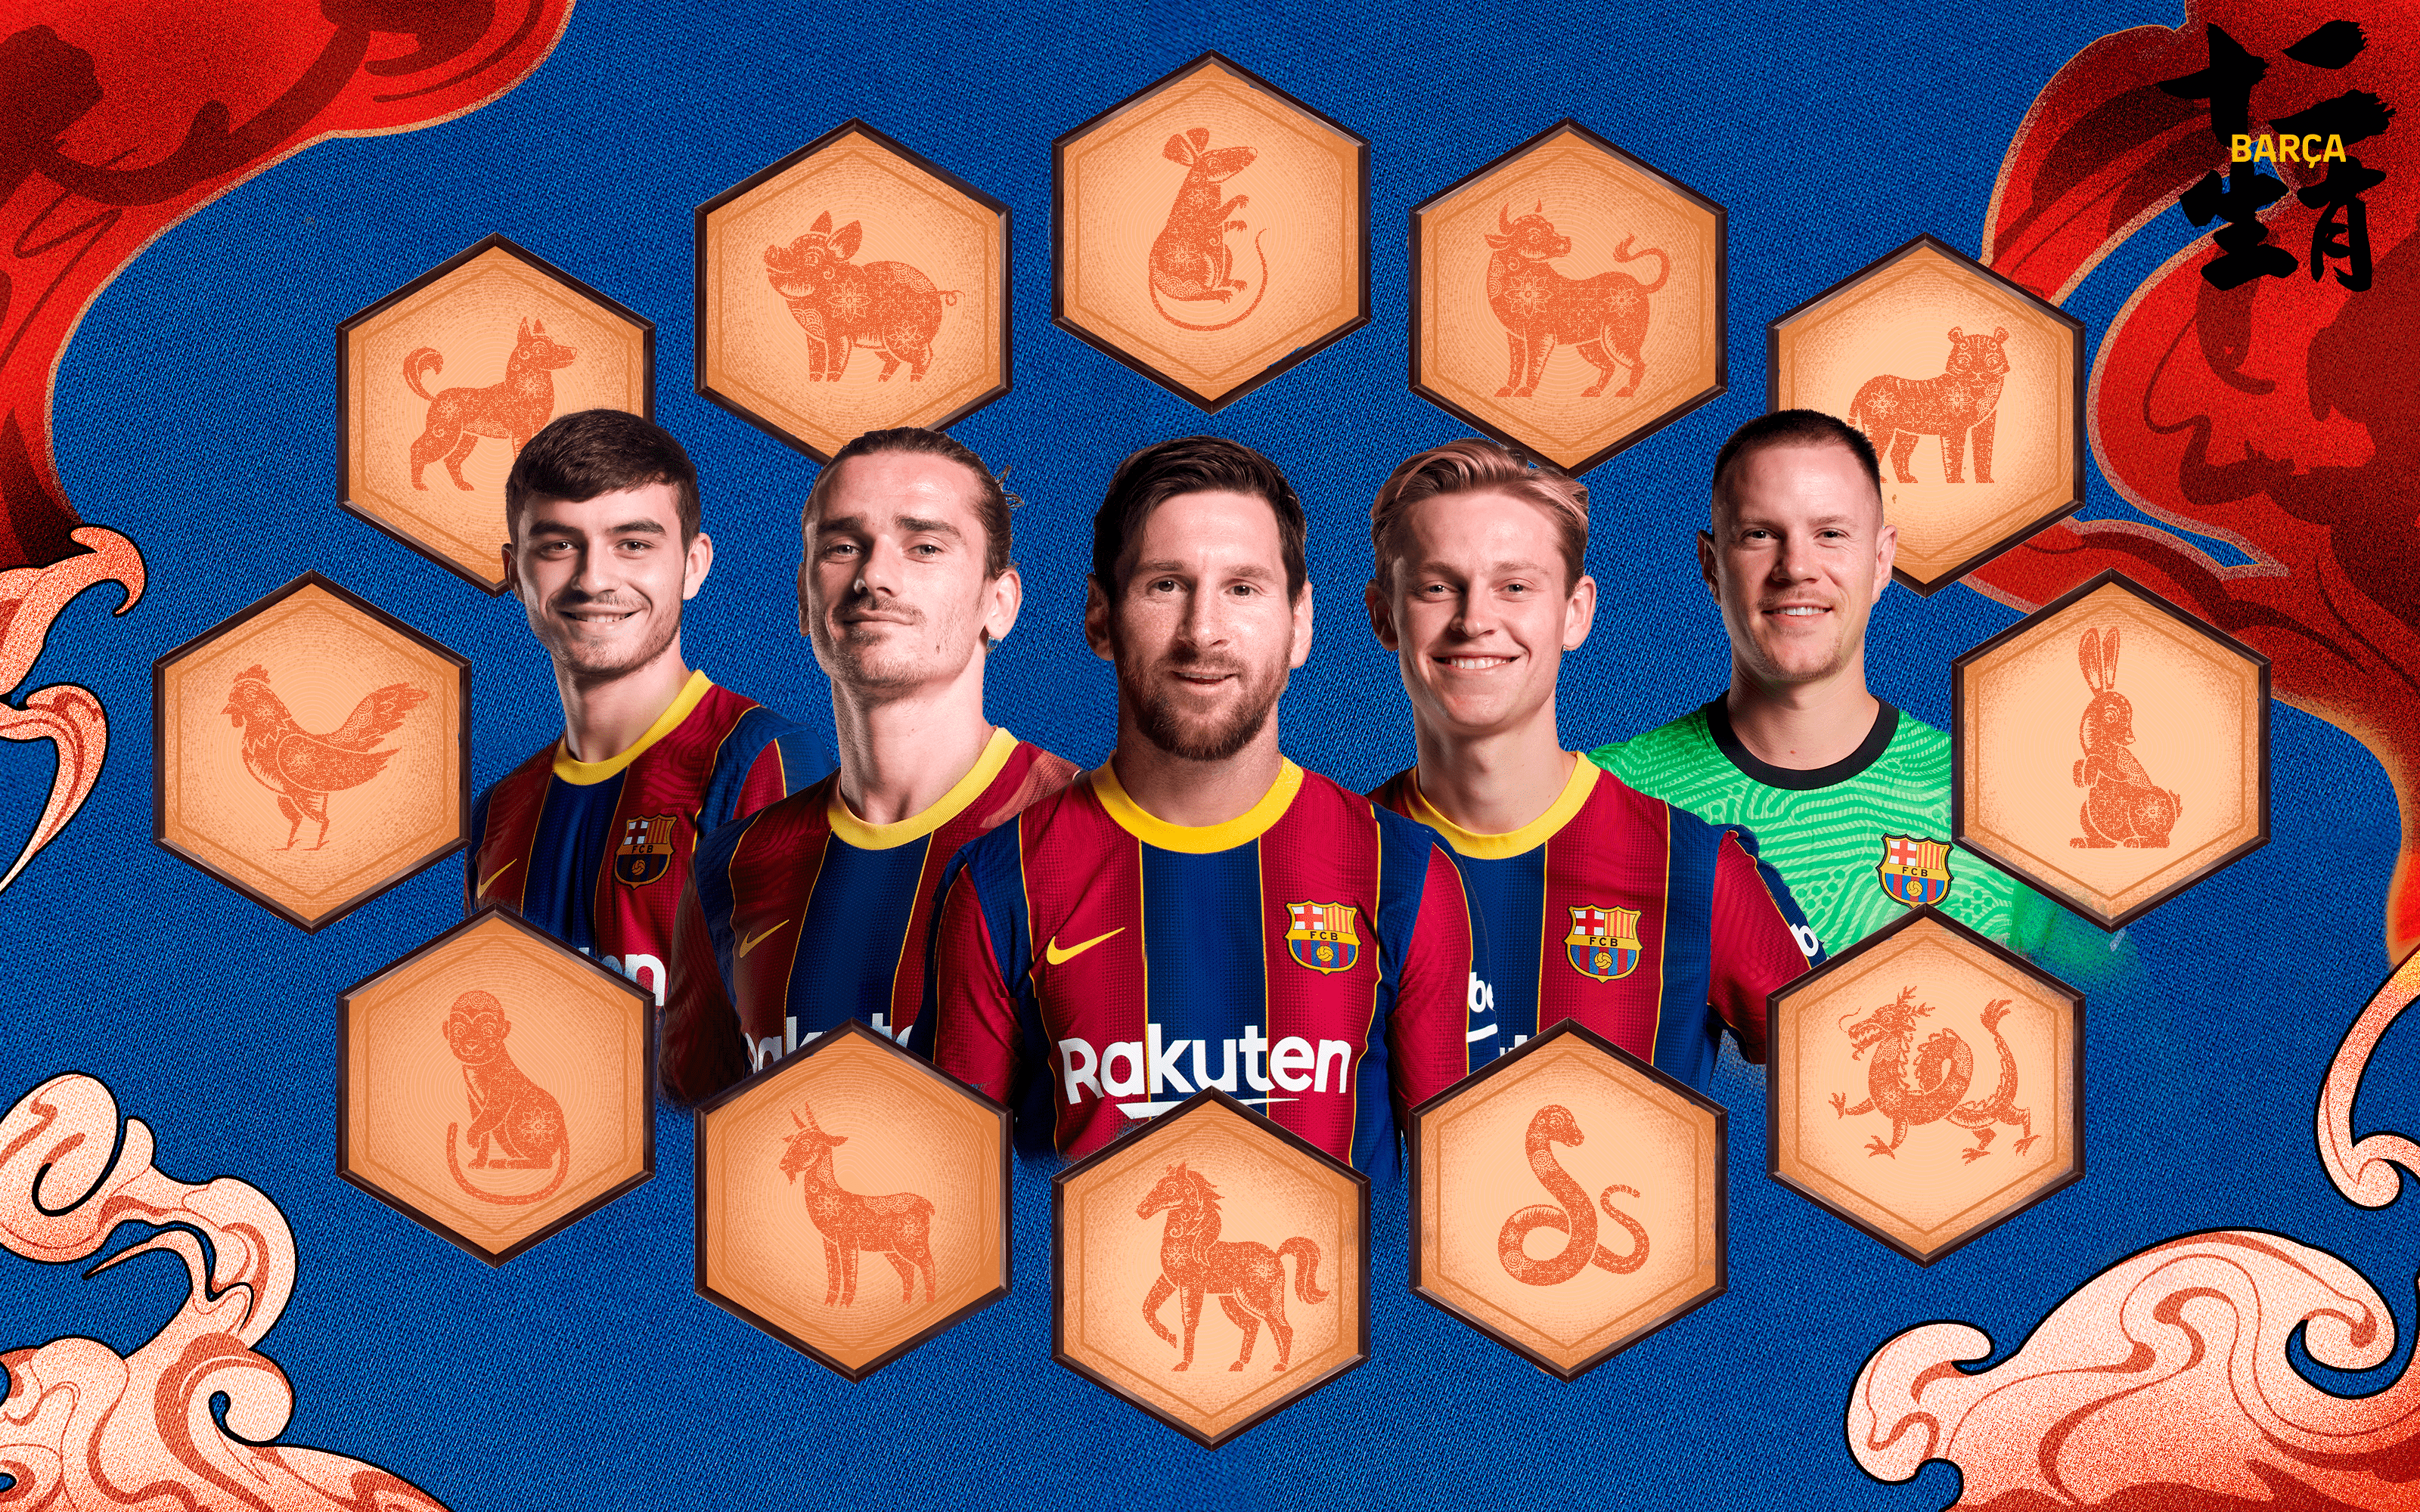 Which Barça players have the same Chinese zodiac sign as you?